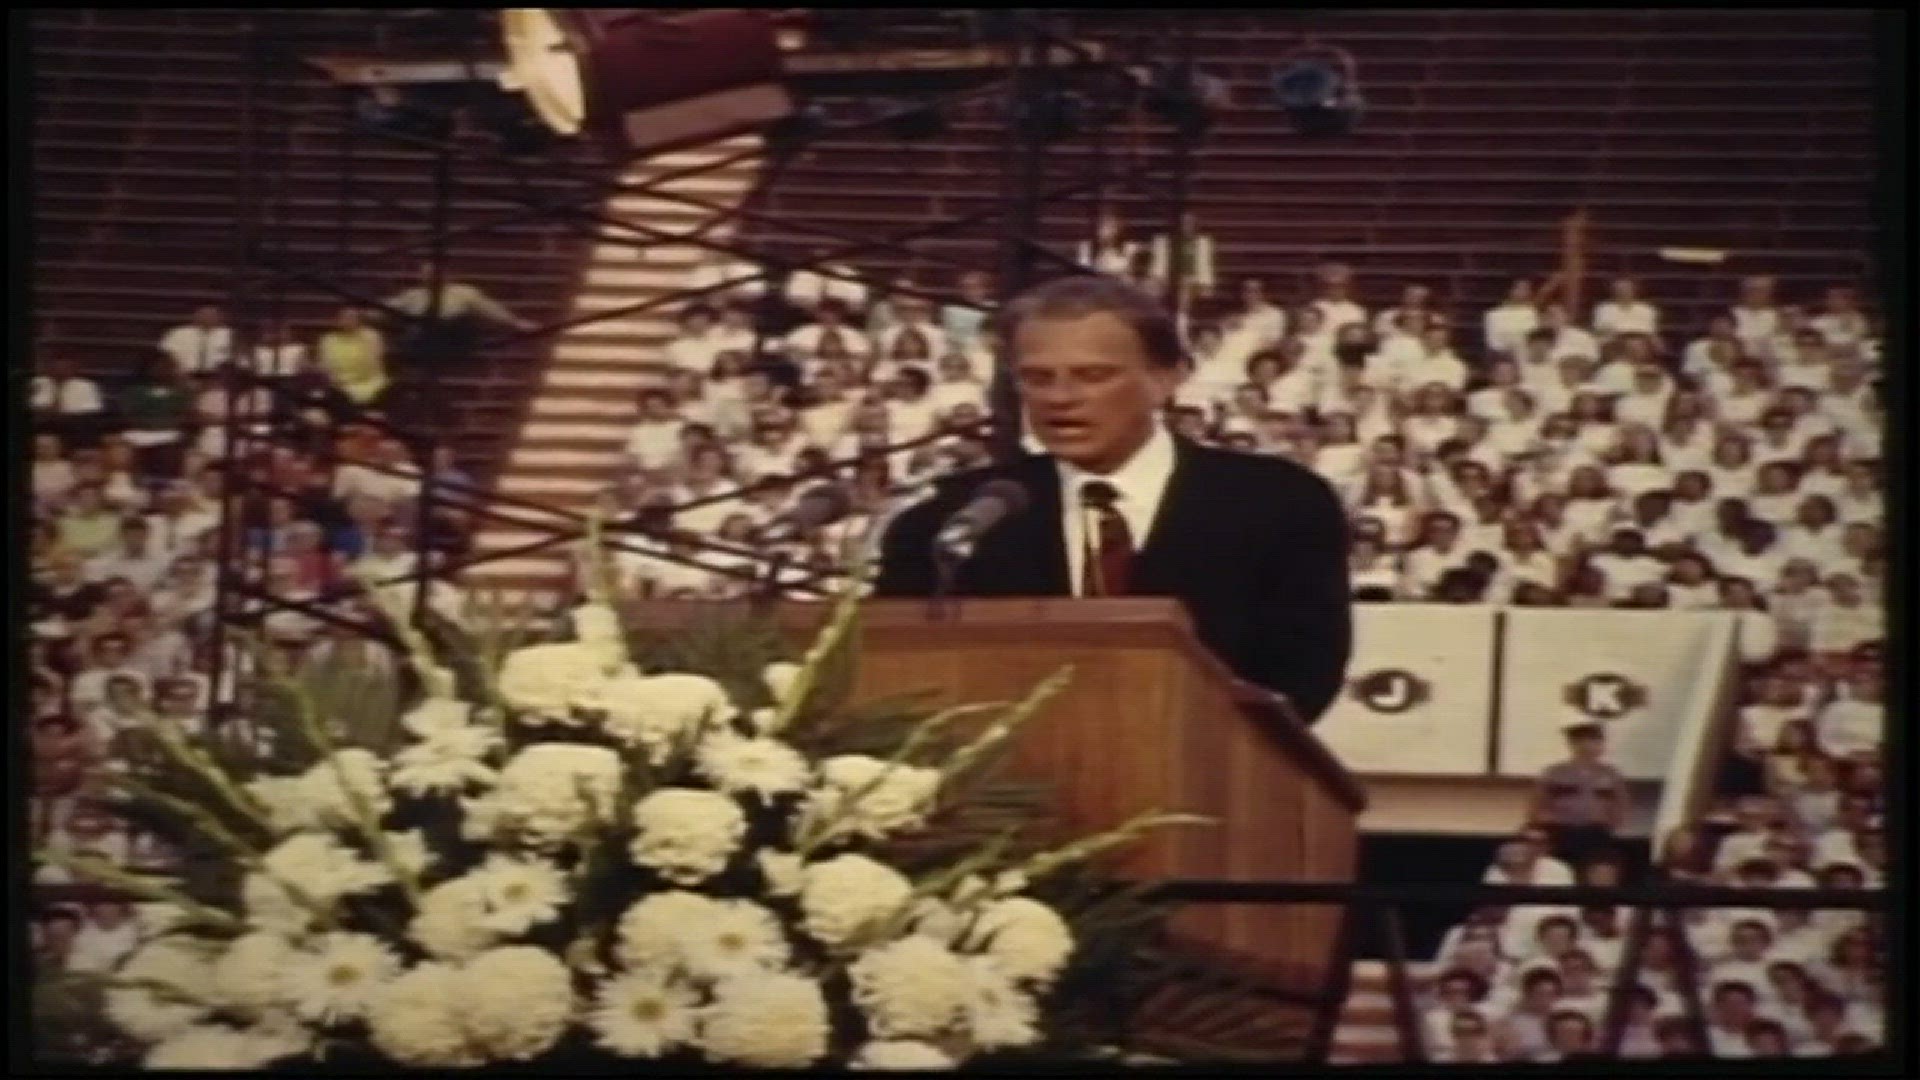 The man renowned as "America's Preacher' was no stranger to East Tennessee, having visited many times through his life and preaching at Neyland Stadium at the turn of the decade in 1970 during his 10-day Crusade in Knoxville.